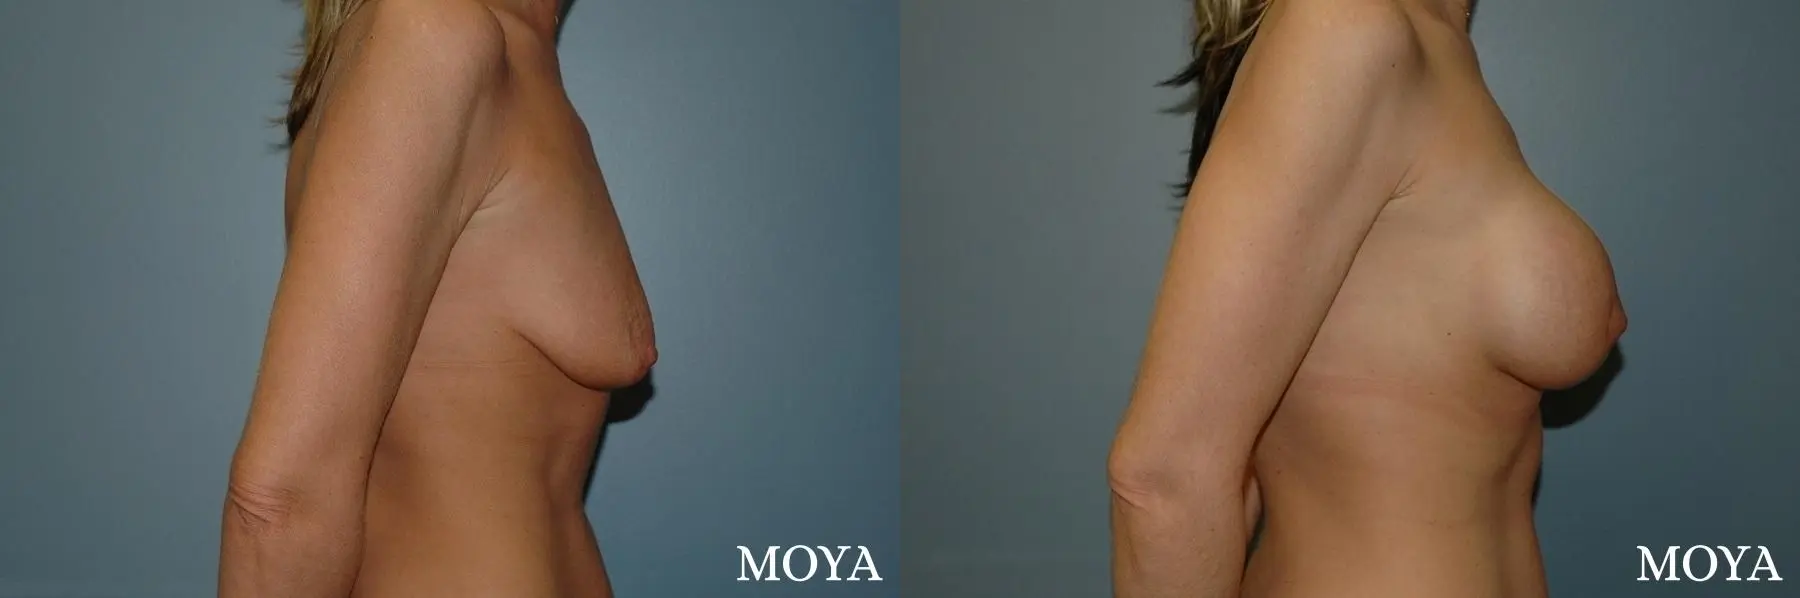 Breast Augmentation With Lift: Patient 2 - Before and After 2